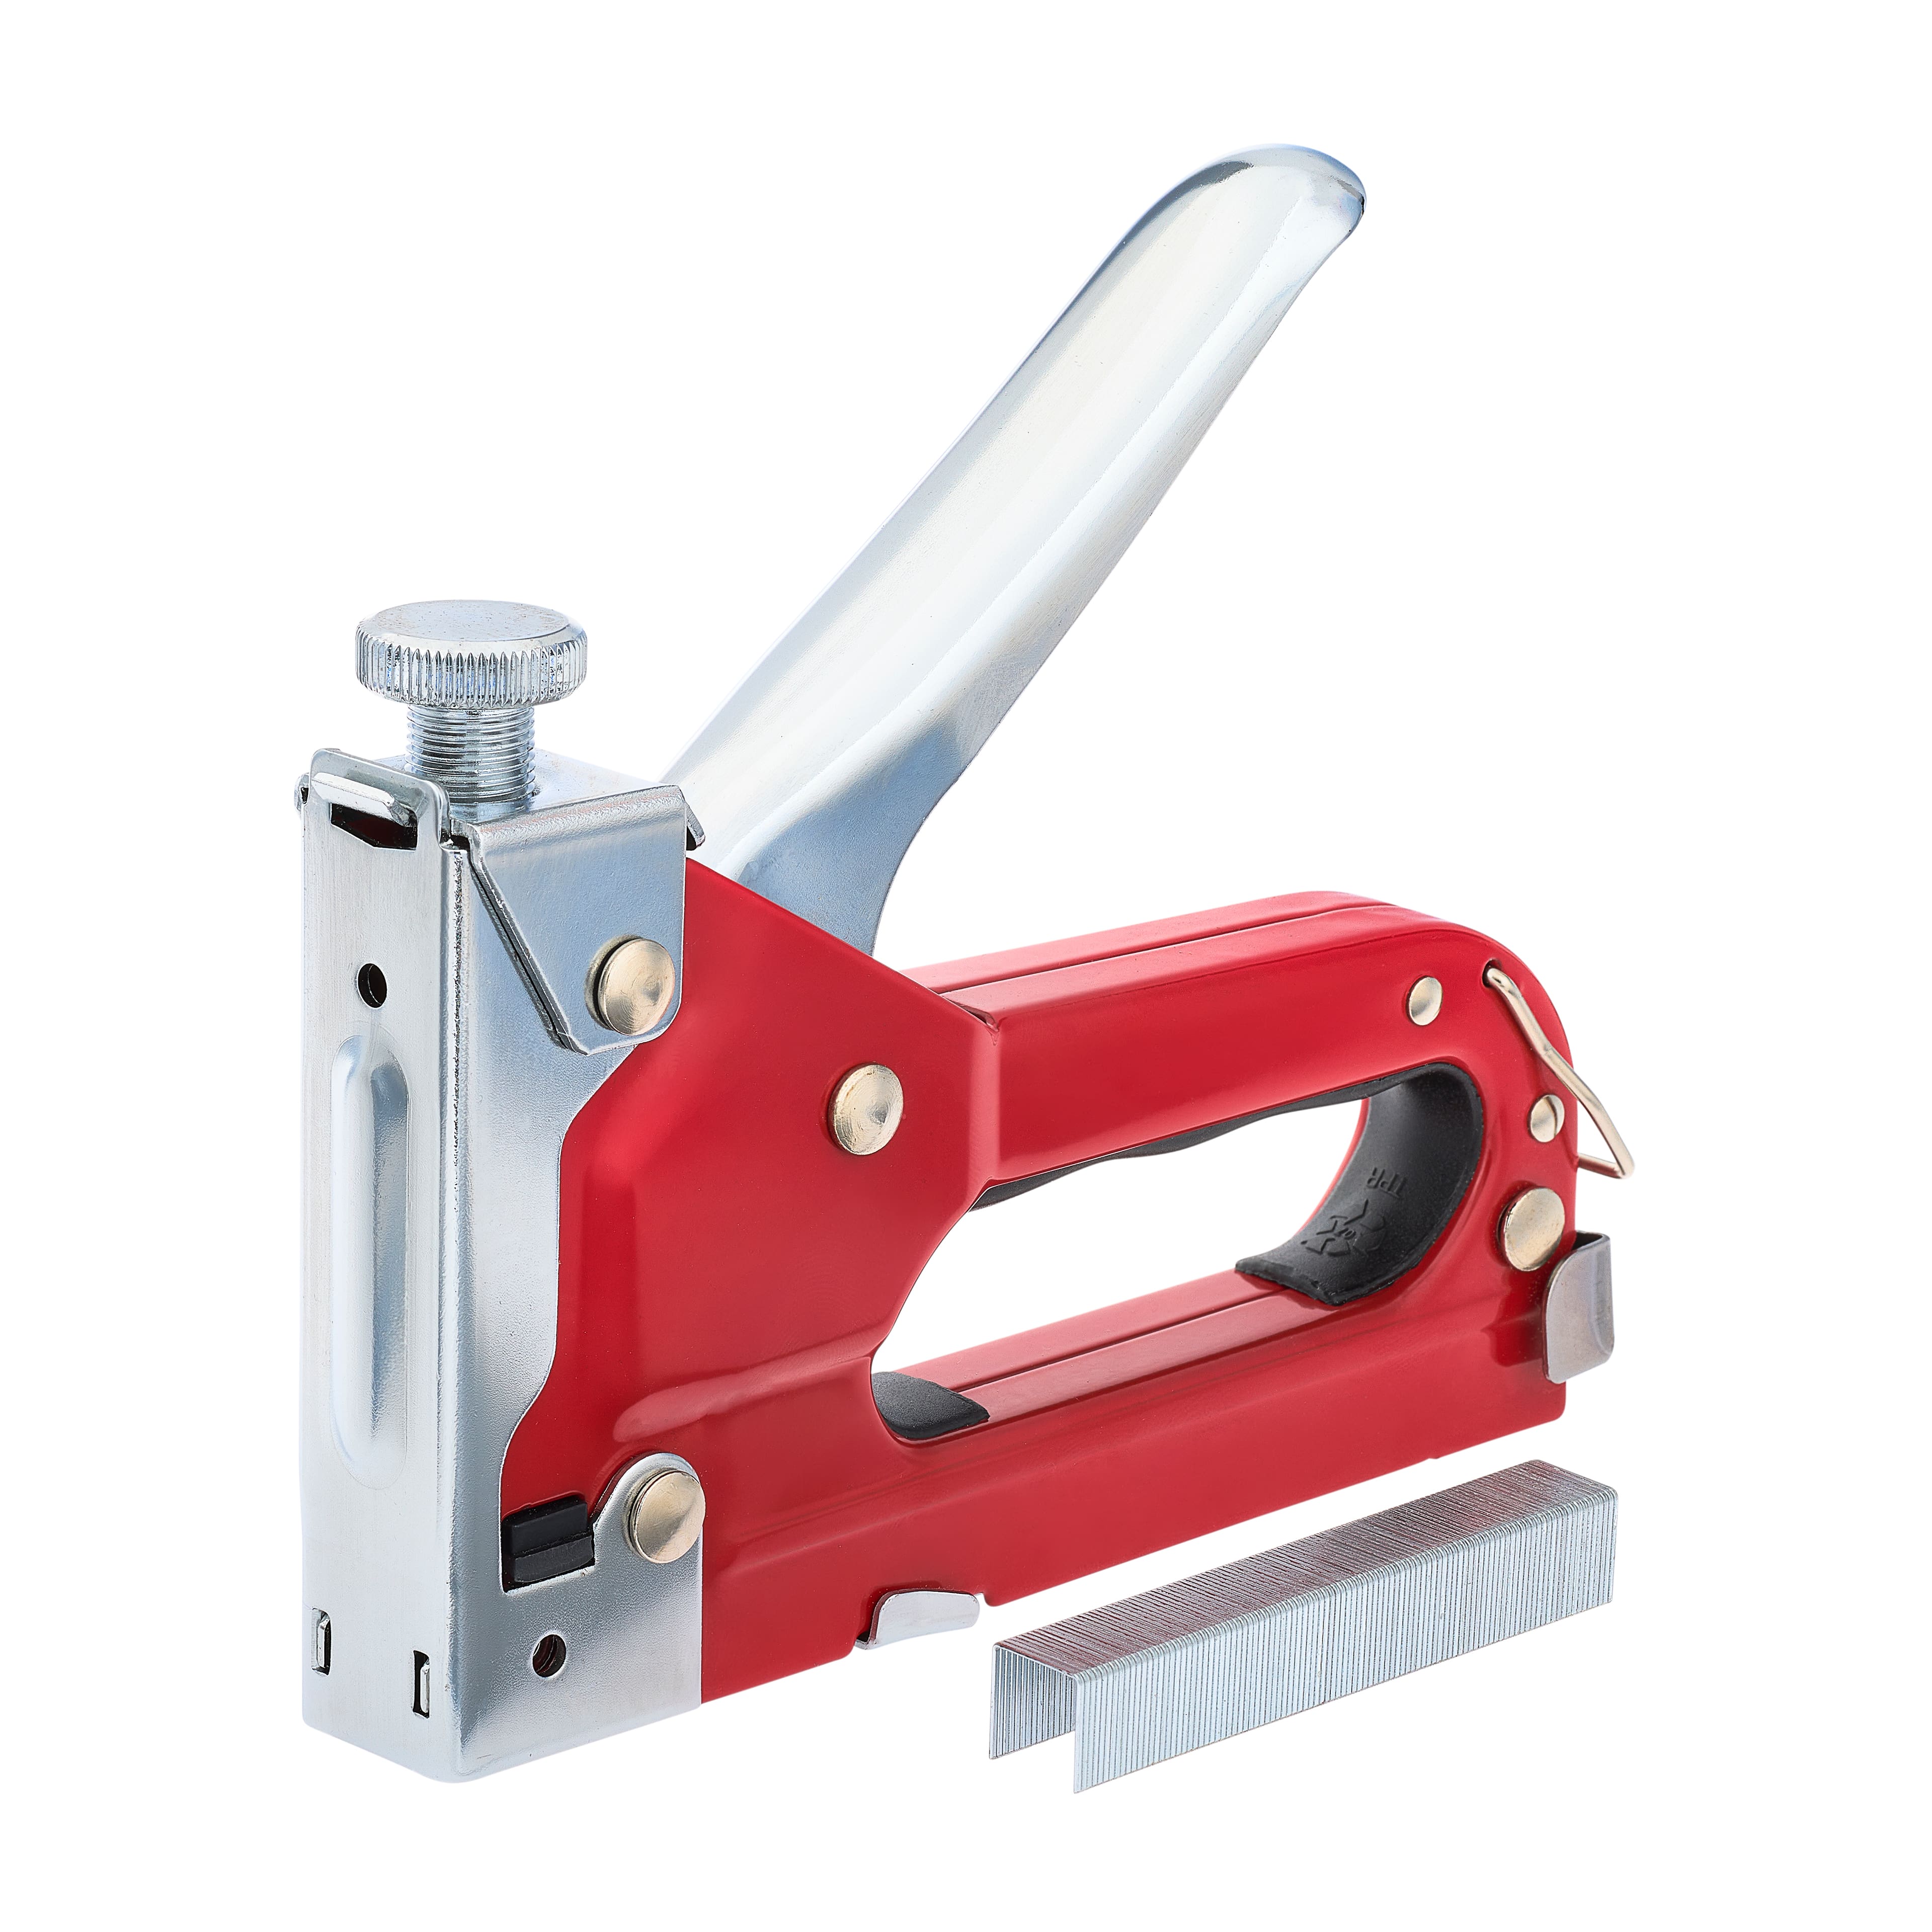 600 Attached Staples High Quality Stainless Steel Heavy Duty Details about   Staple Gun 